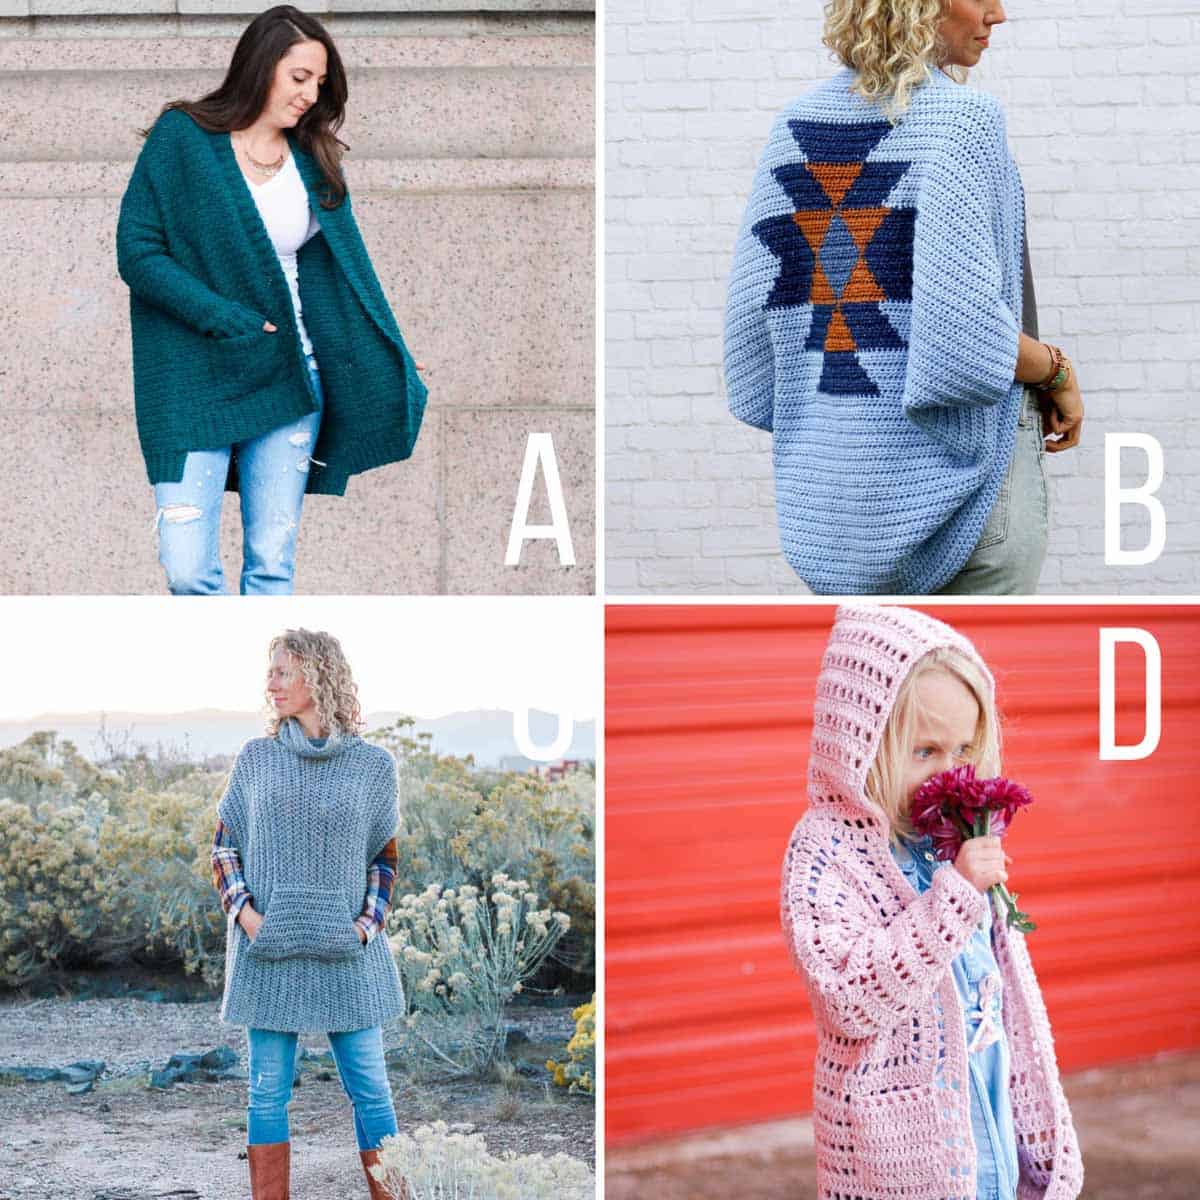 Grid of four free crochet sweater patterns. One is a thick crochet cardigan with pockets, one is a colorwork crochet shrug, one is a crochet poncho and one is a kids crochet cardigan.